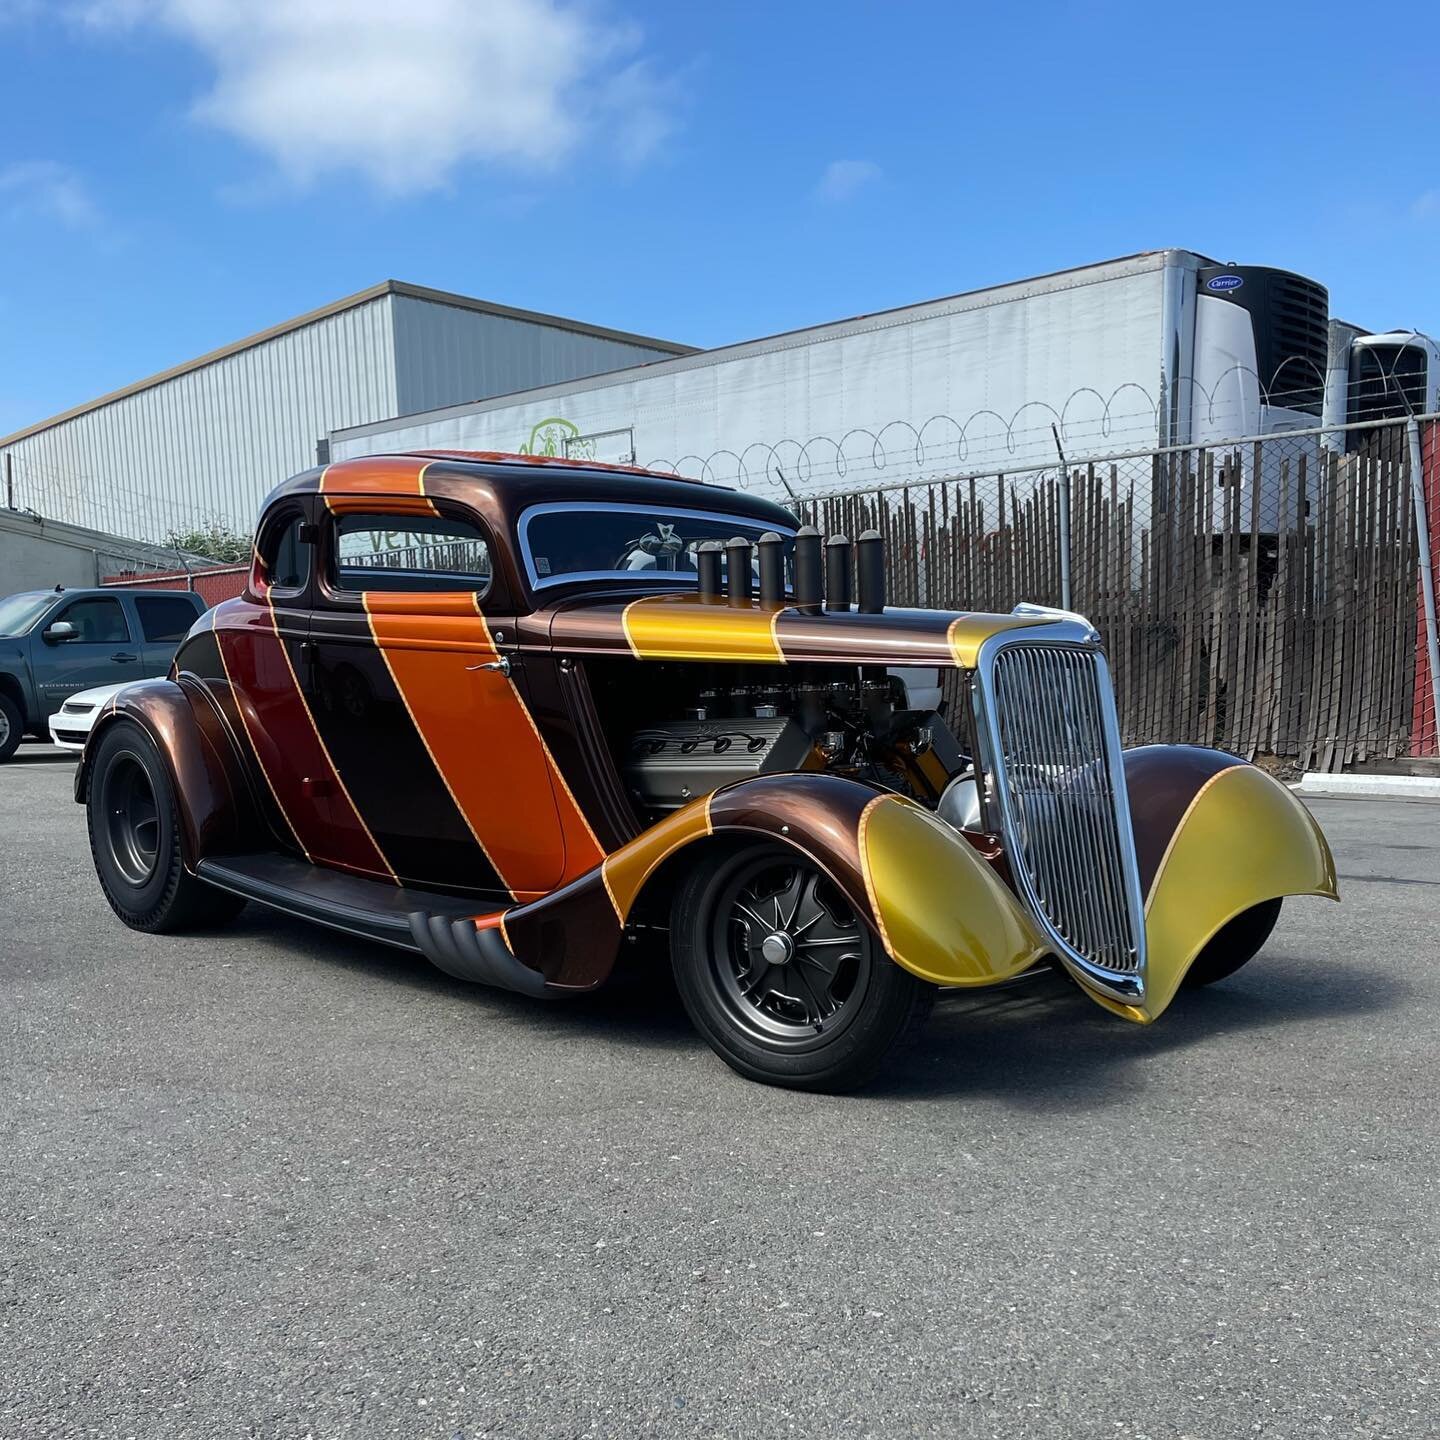 34 Ford Hot Rod of the year!